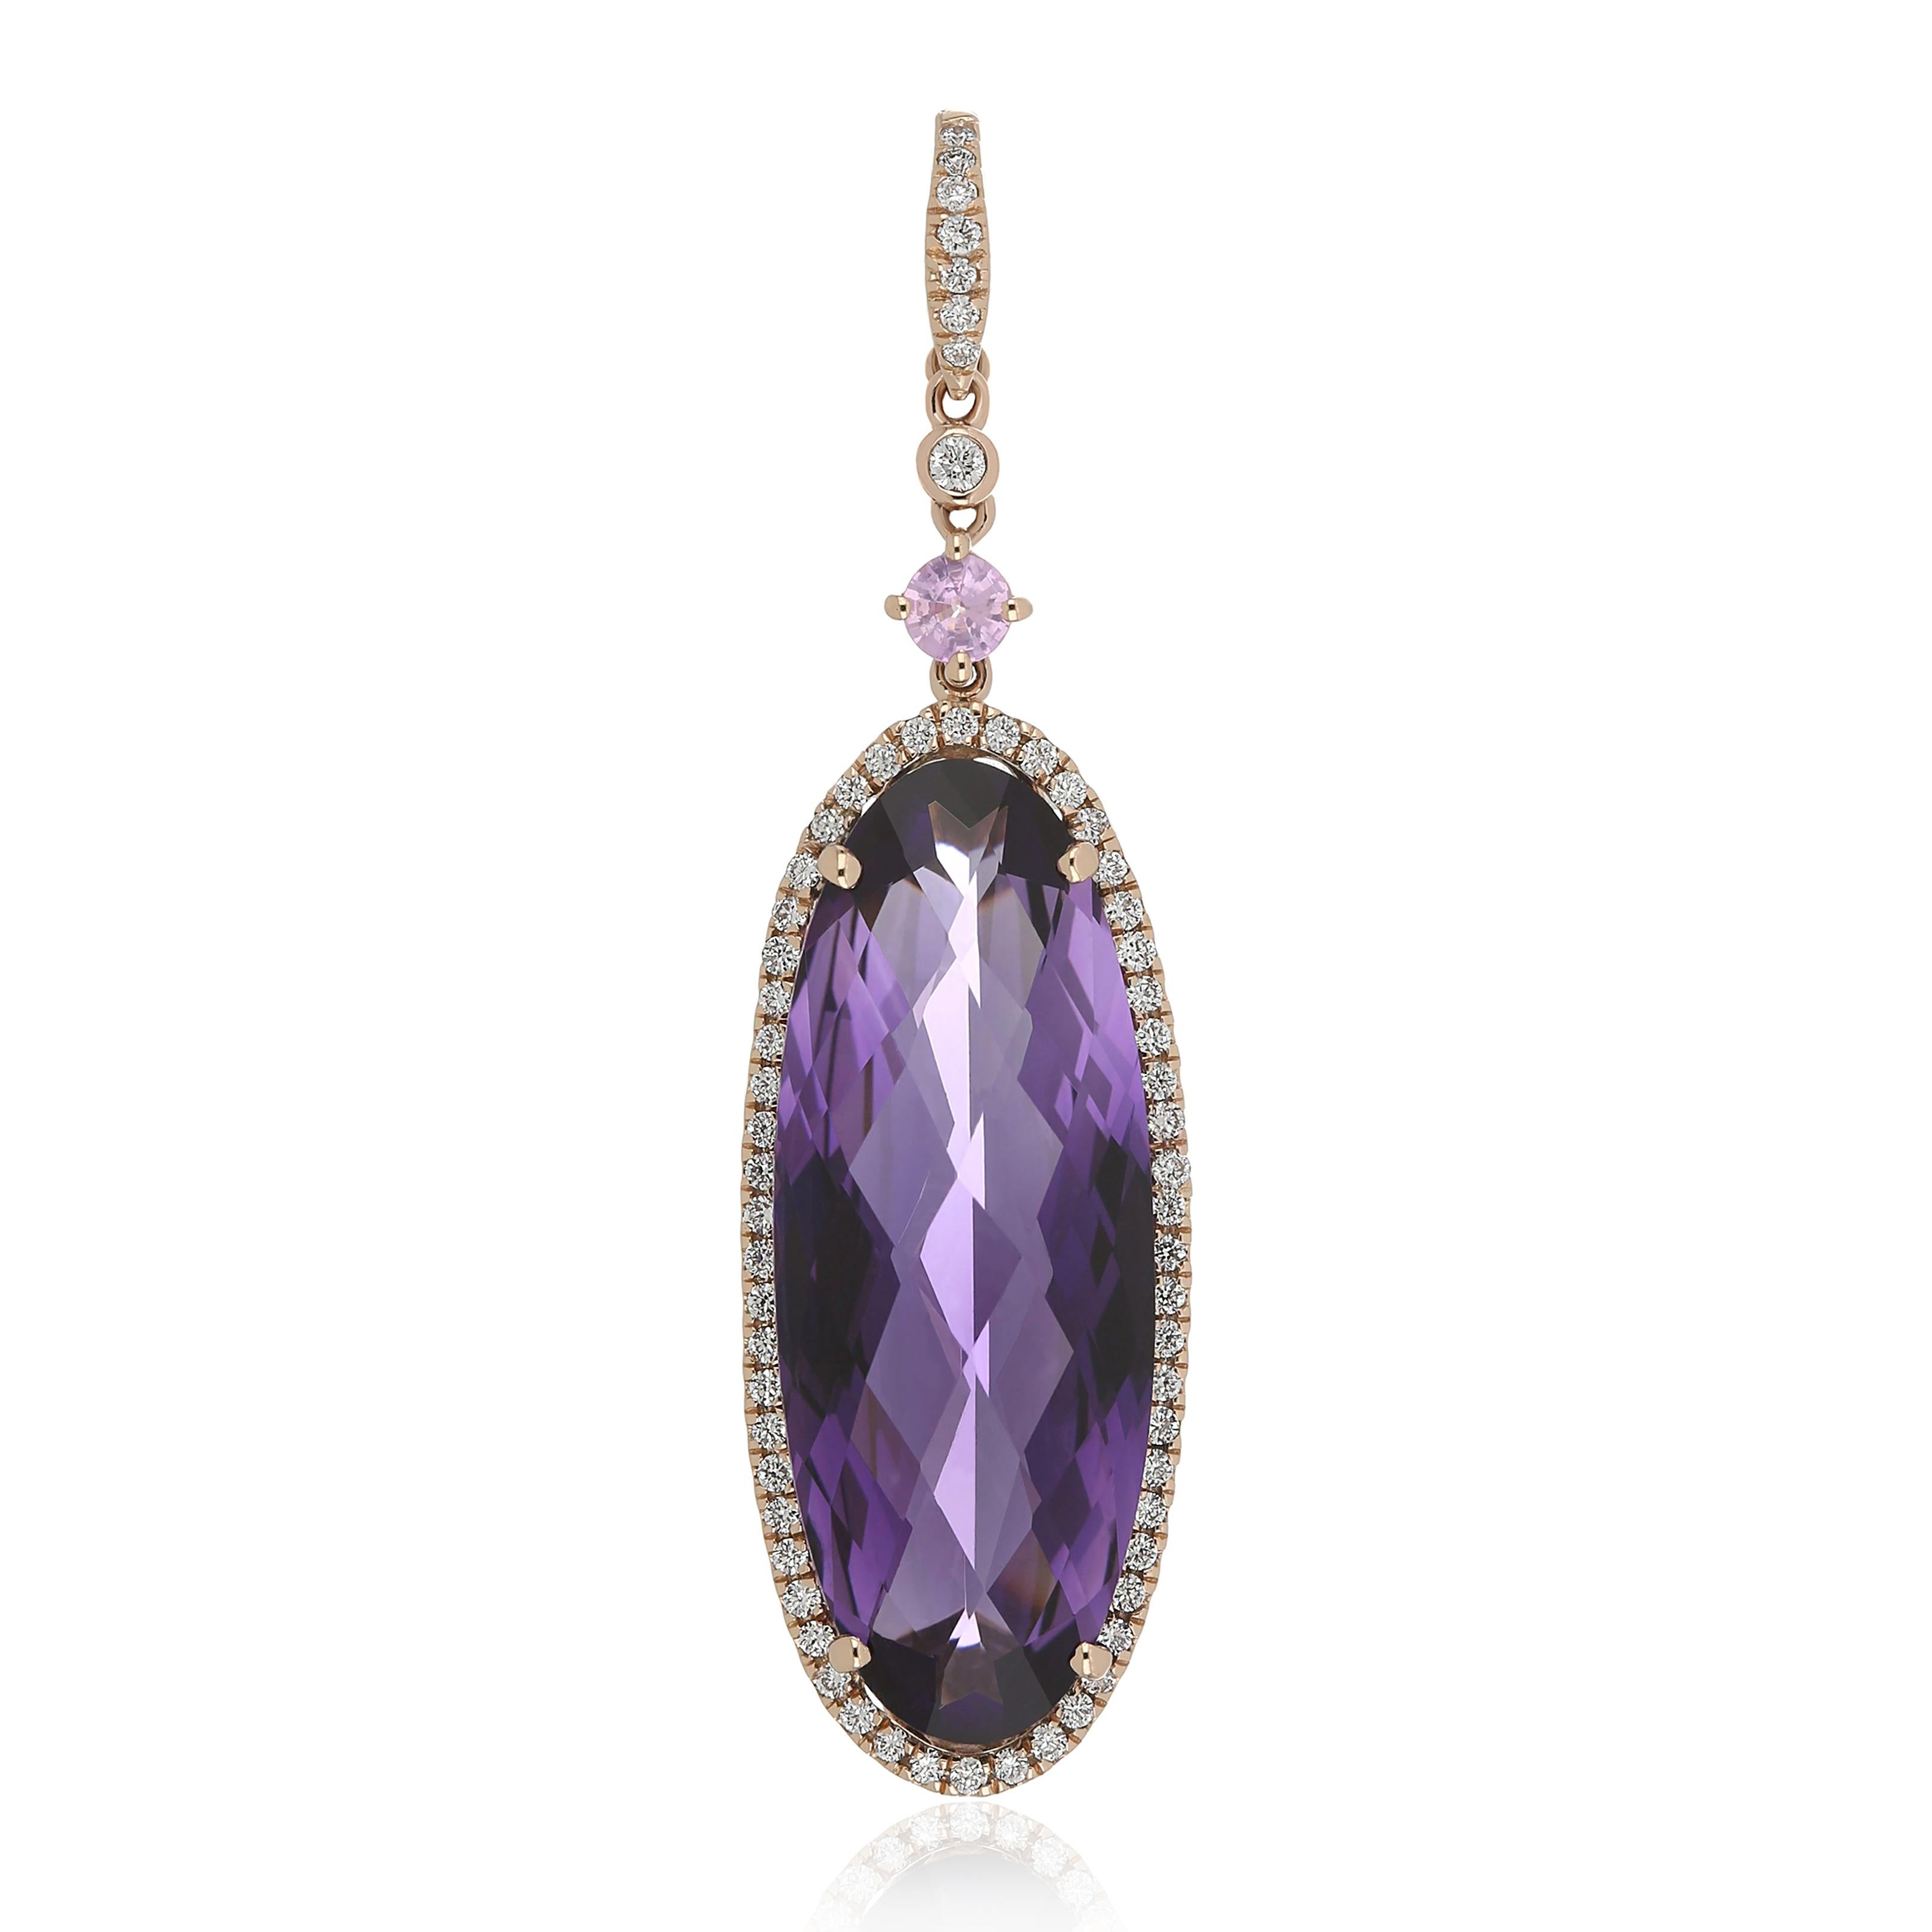 Elegant and exquisitely detailed 14 Karat Rose Gold Pendant, center set with 9.12Cts .Oval Shape Amethyst, 0.11Cts of natural Pink Sapphire accented with micro pave set Diamonds, weighing approx. 0.281Cts Beautifully Hand crafted in 14 Karat Rose